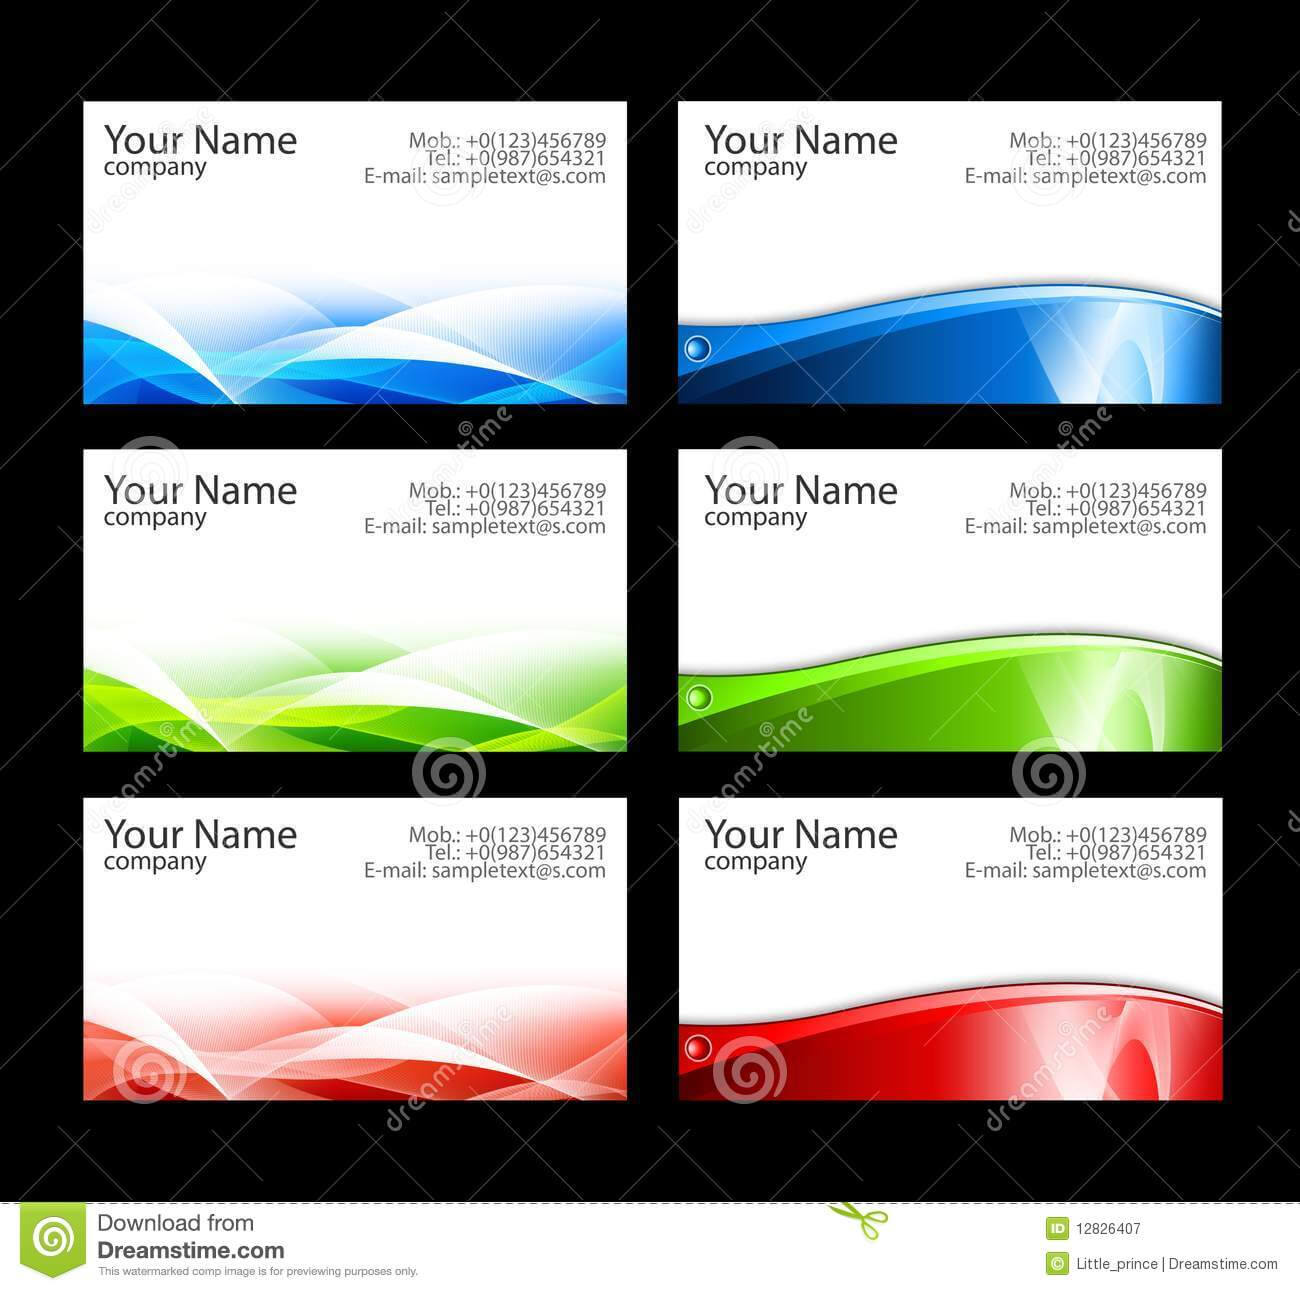 Business Cards Templates Stock Illustration. Illustration Of With Free Business Cards Templates For Word